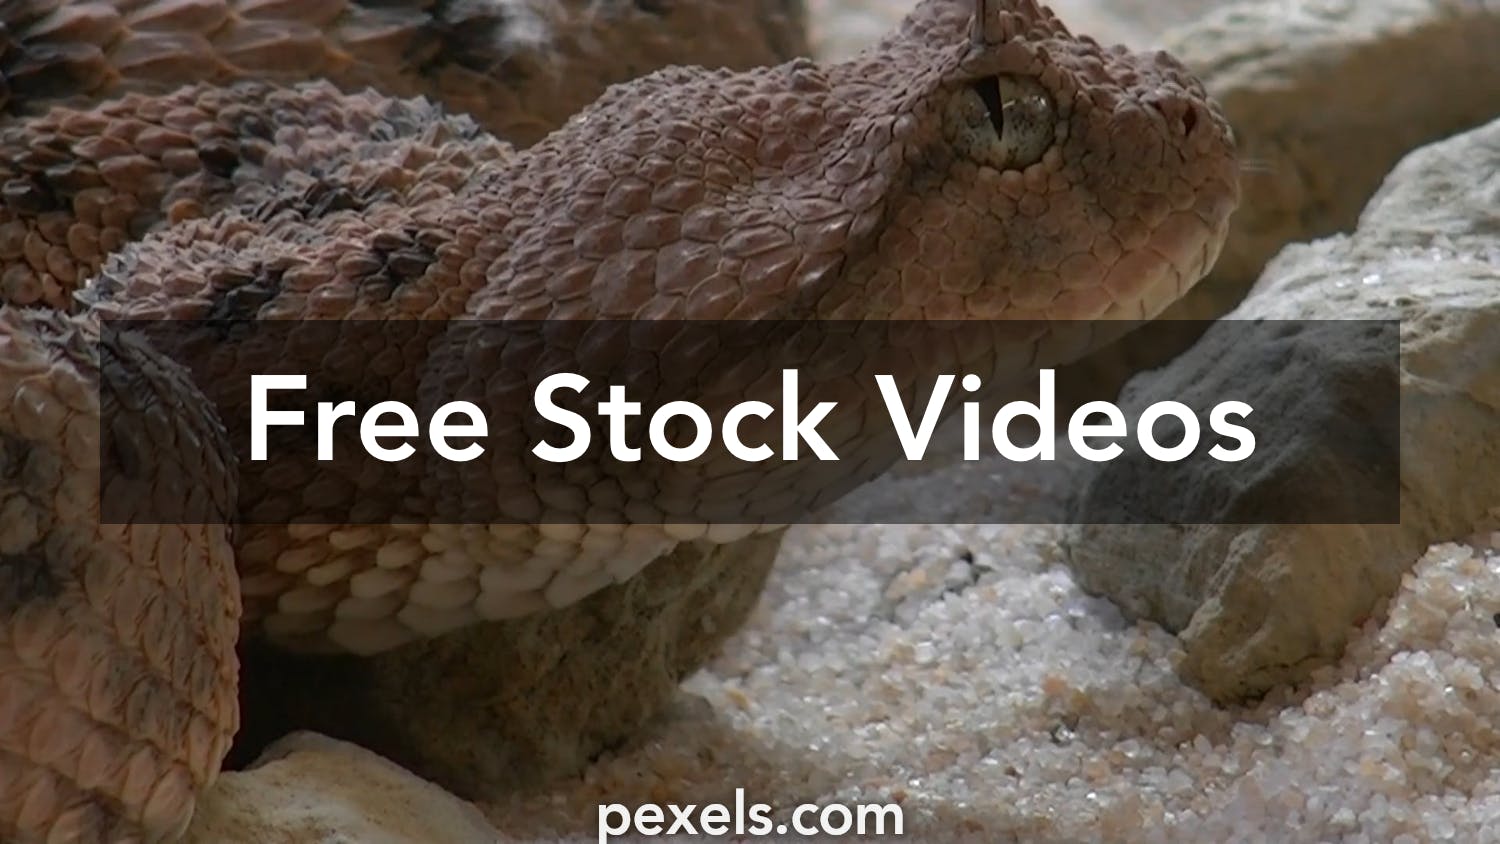 169 Old Snake Game Stock Video Footage - 4K and HD Video Clips